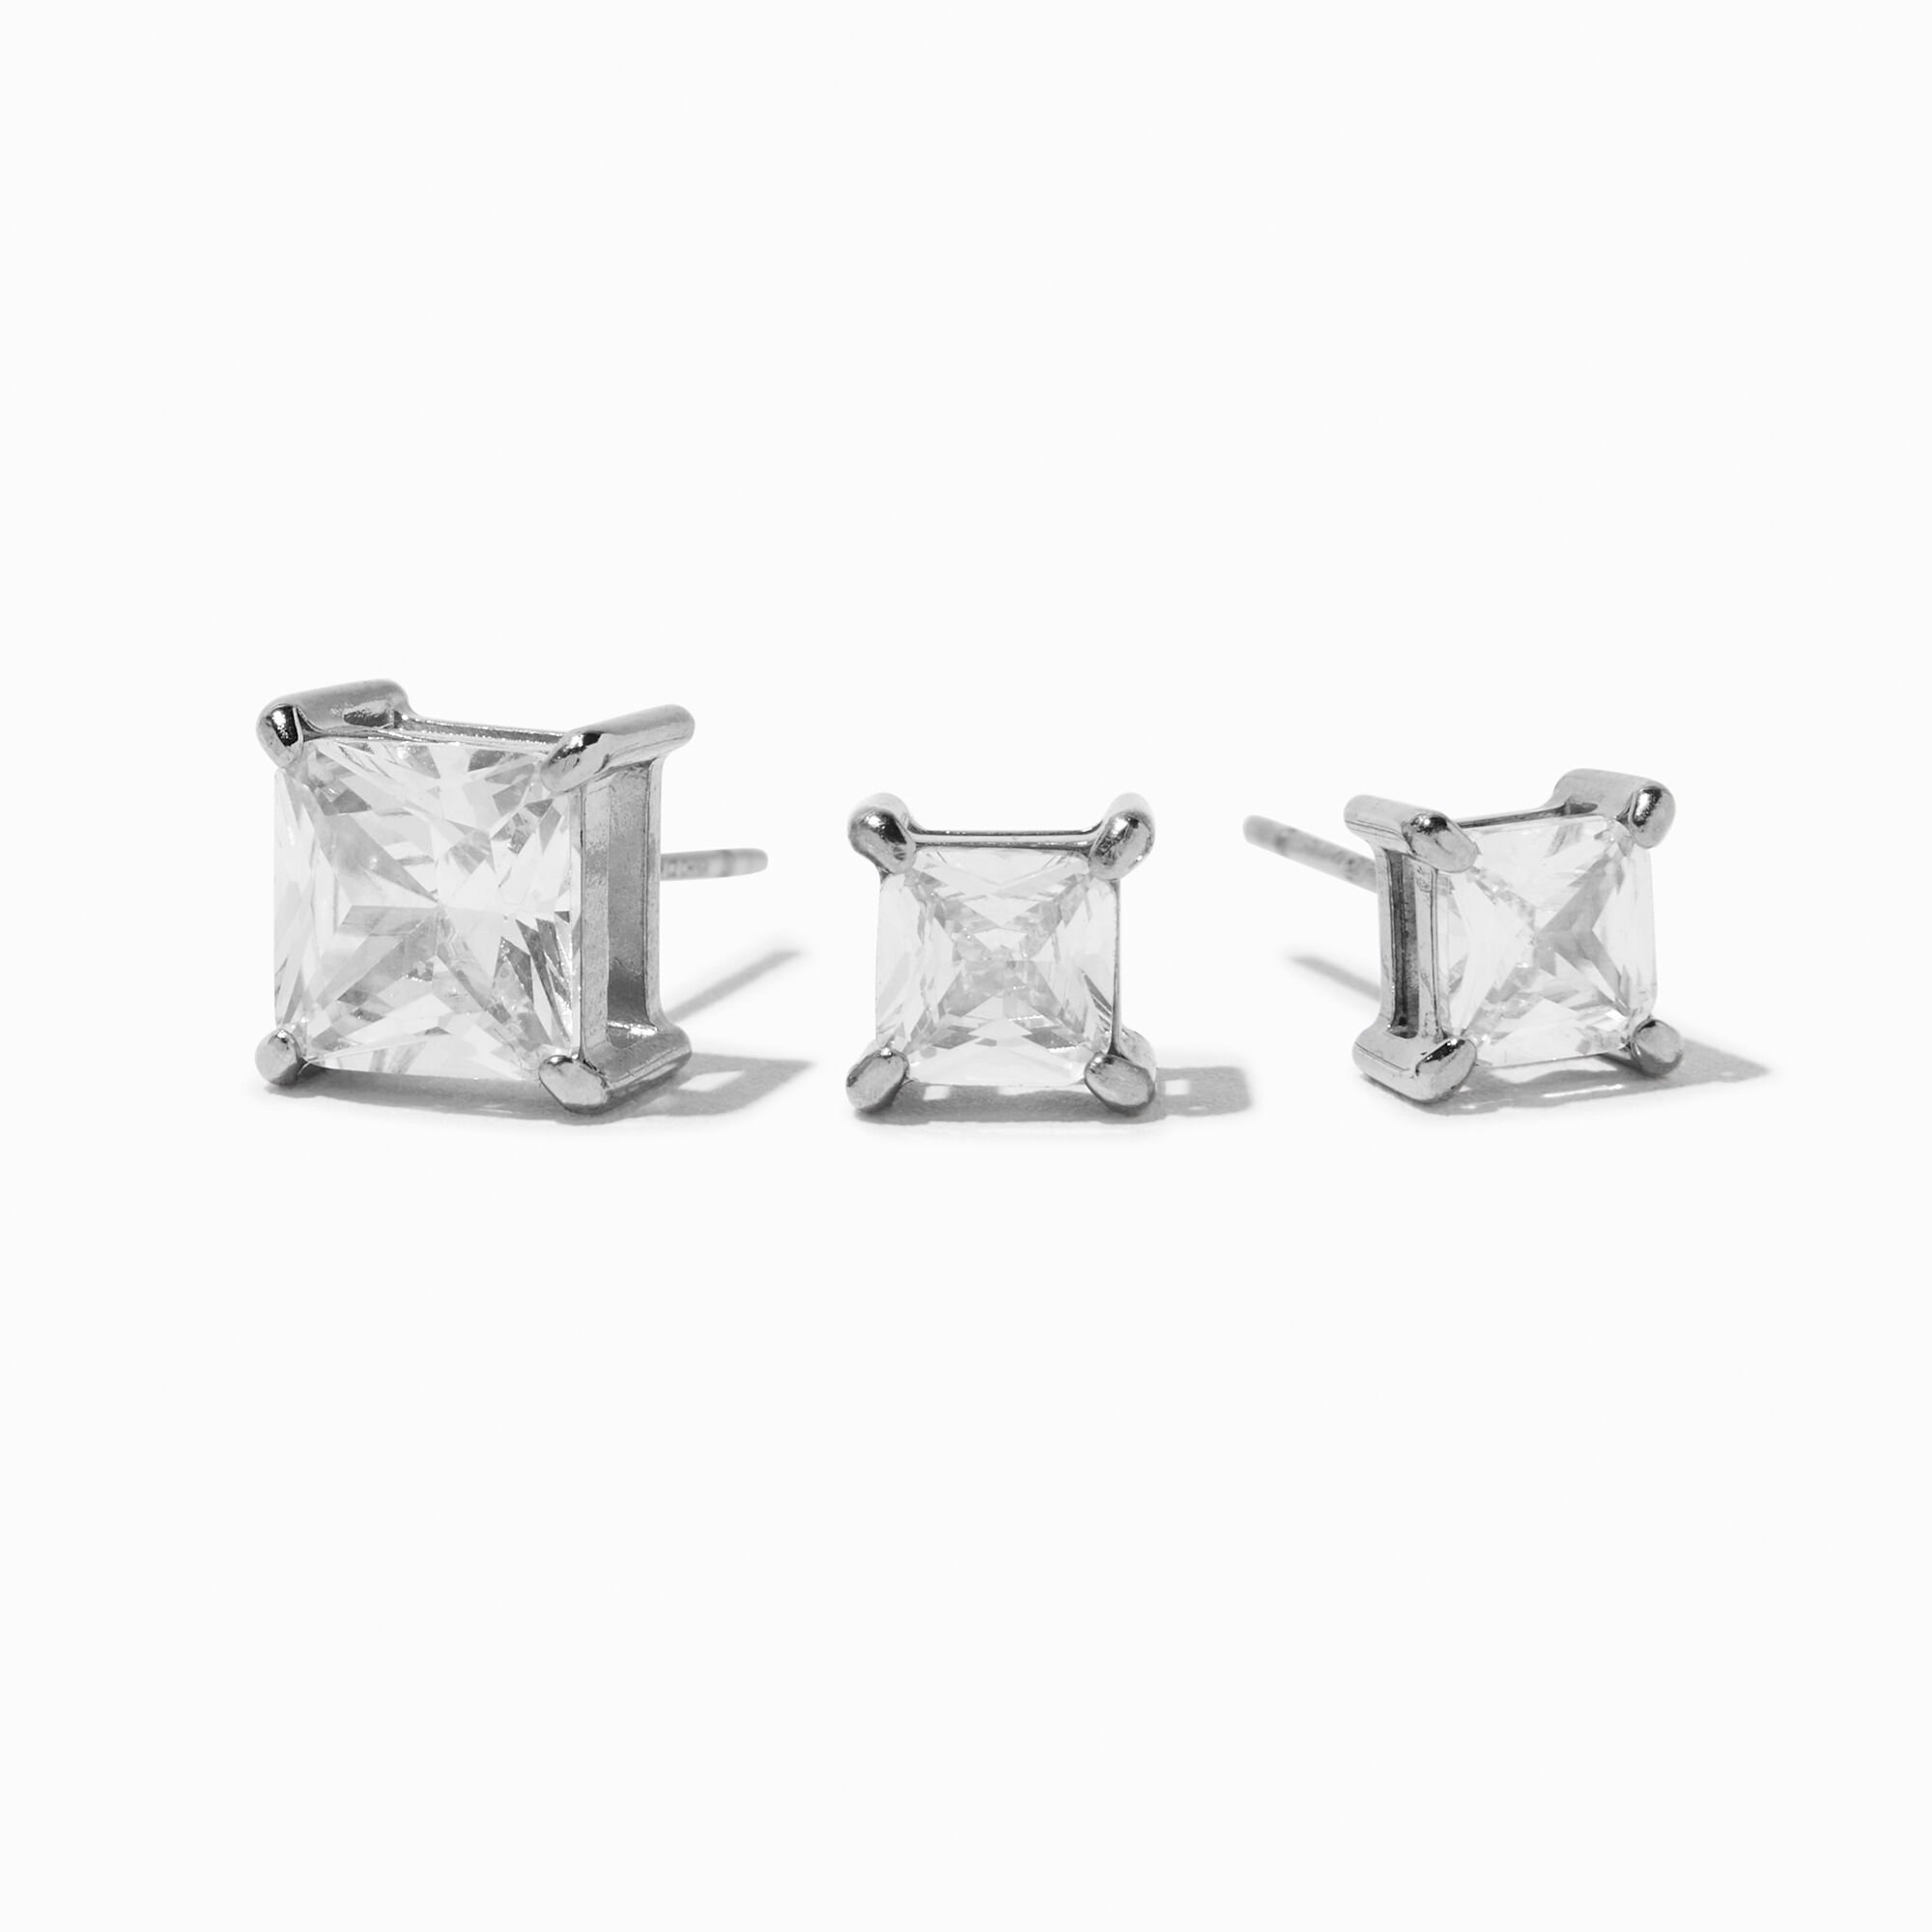 View Claires Tone Stainless Steel Cubic Zirconia 5MM6MM7MM Square Stud Earrings 3 Pack Silver information